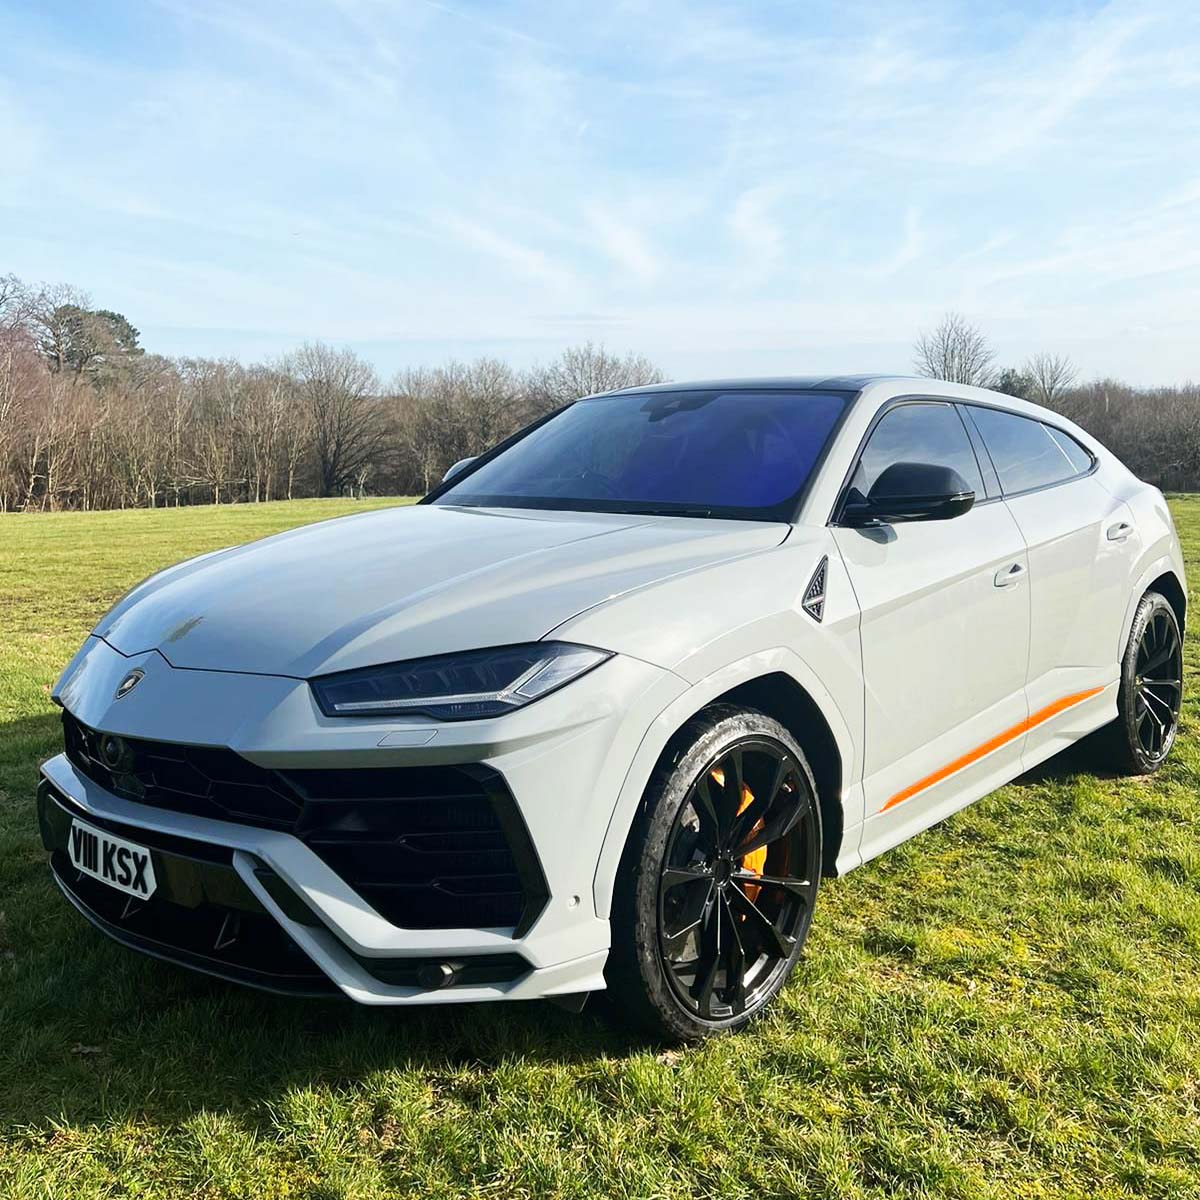 White Lamborghini Urus parked in the middle of a green park with trees in the background